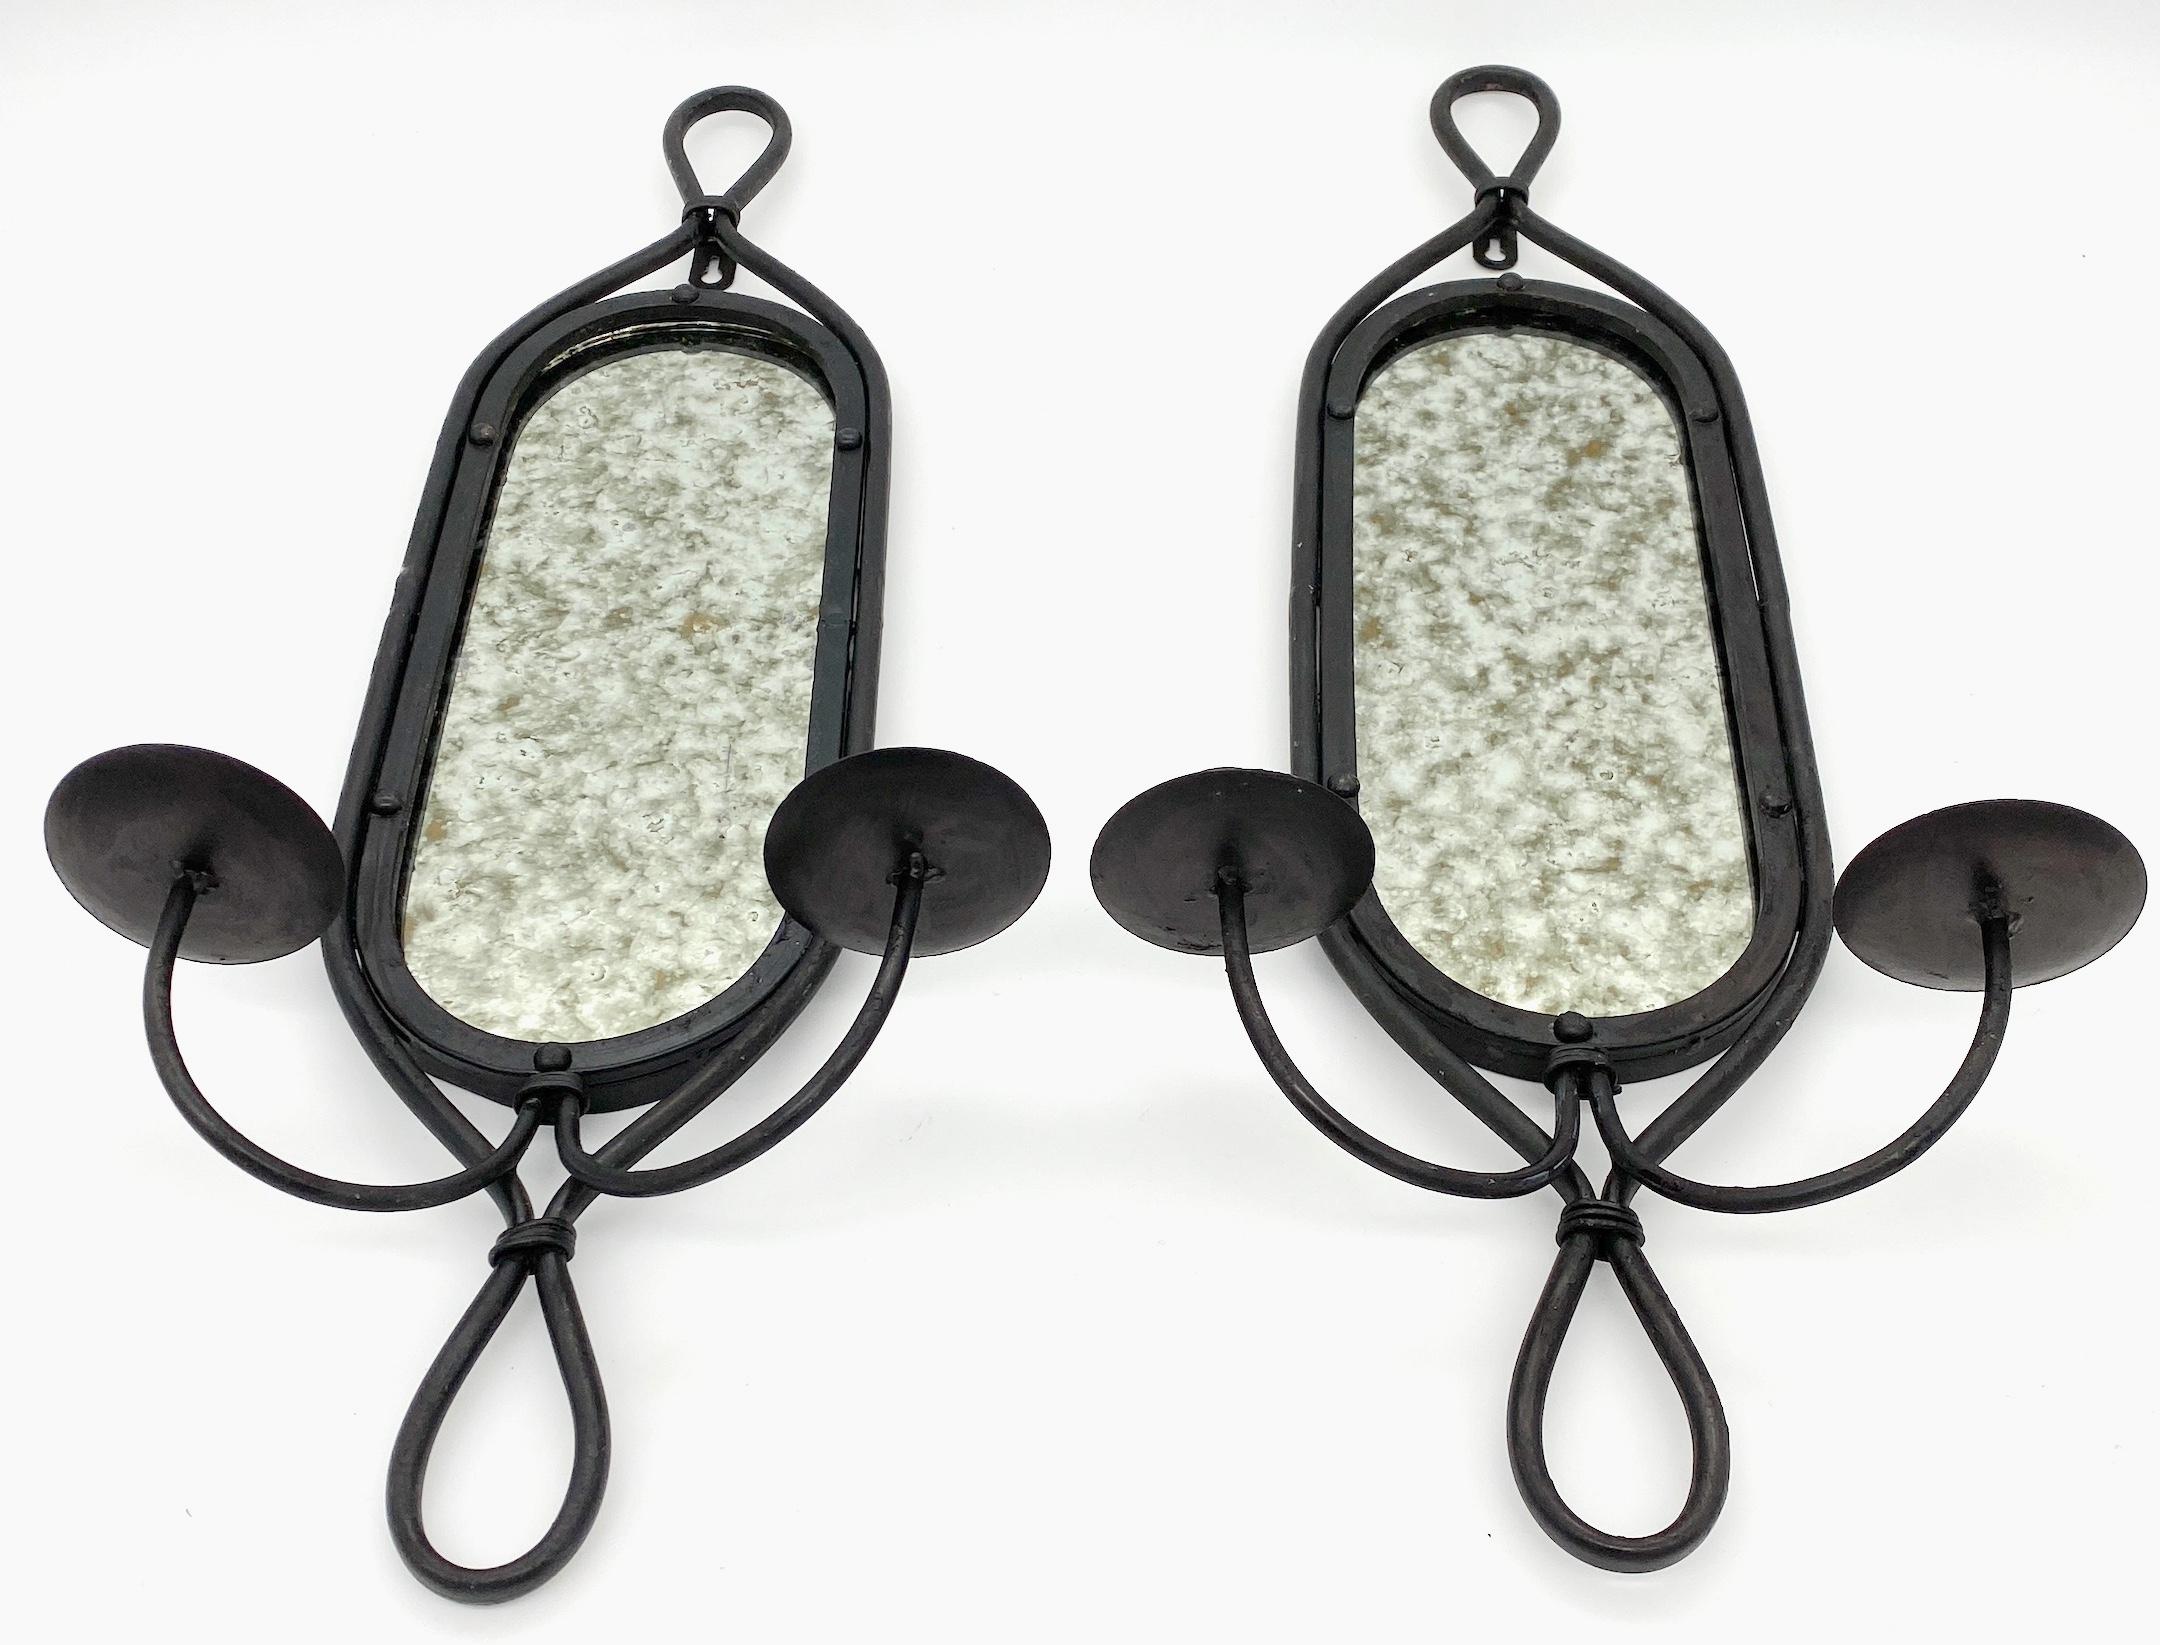 Pair French Modern Blackened Wrought Iron Distressed Mirror 2 Light Candle Sconces
France, 20th Century 

A pair of French Modern Blackened Wrought Iron Distressed Mirror 2-Light Candle Sconces, originating from  the 20th-century France. Each sconce